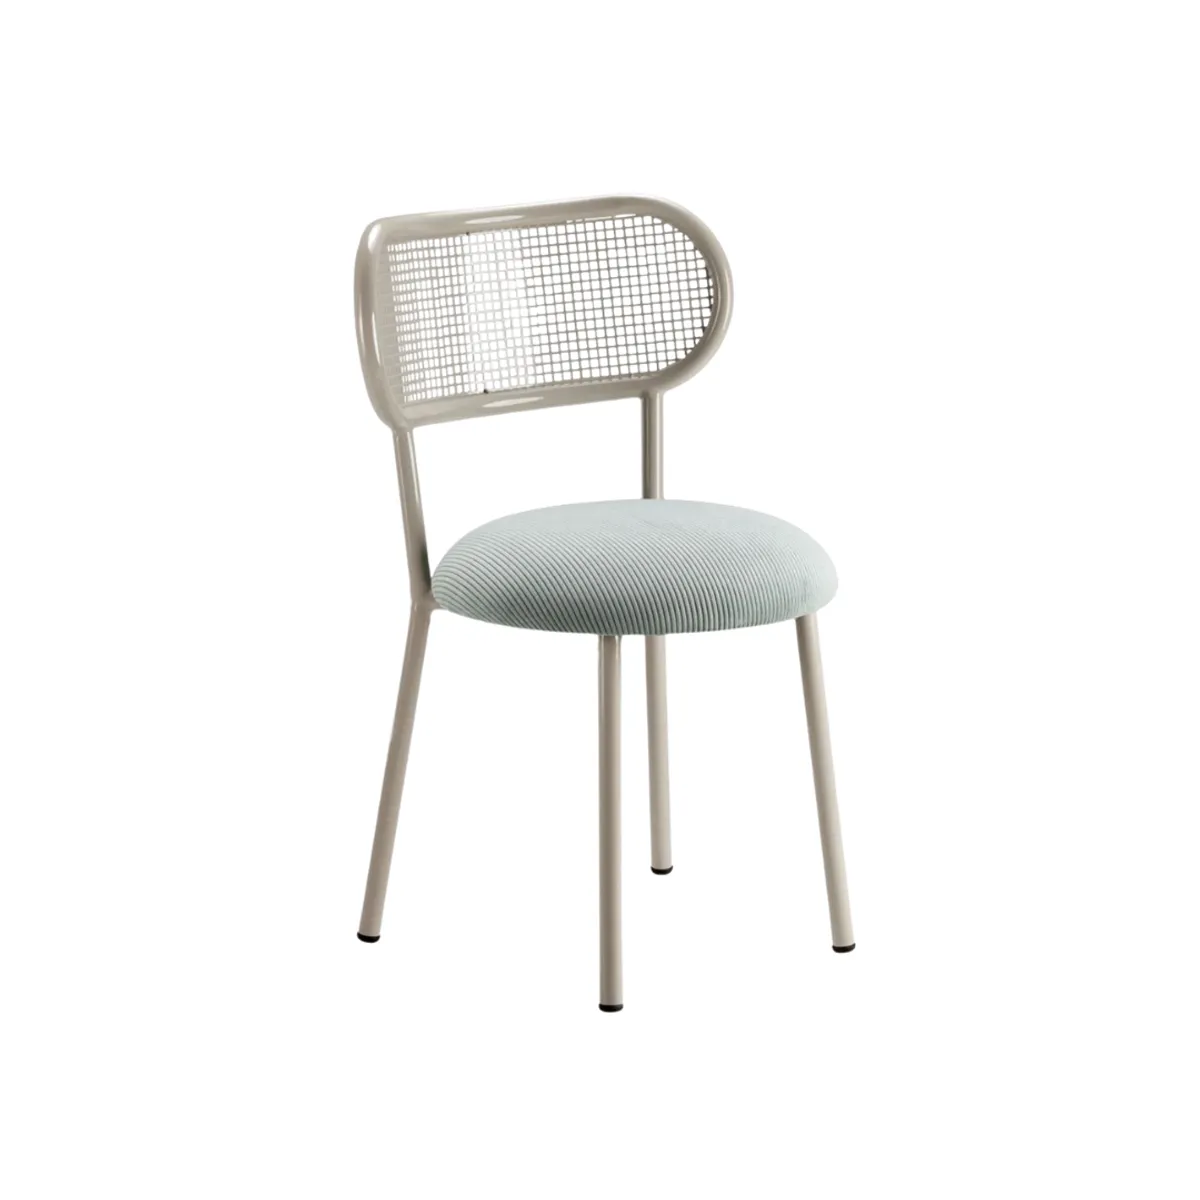 Emory side chair 3